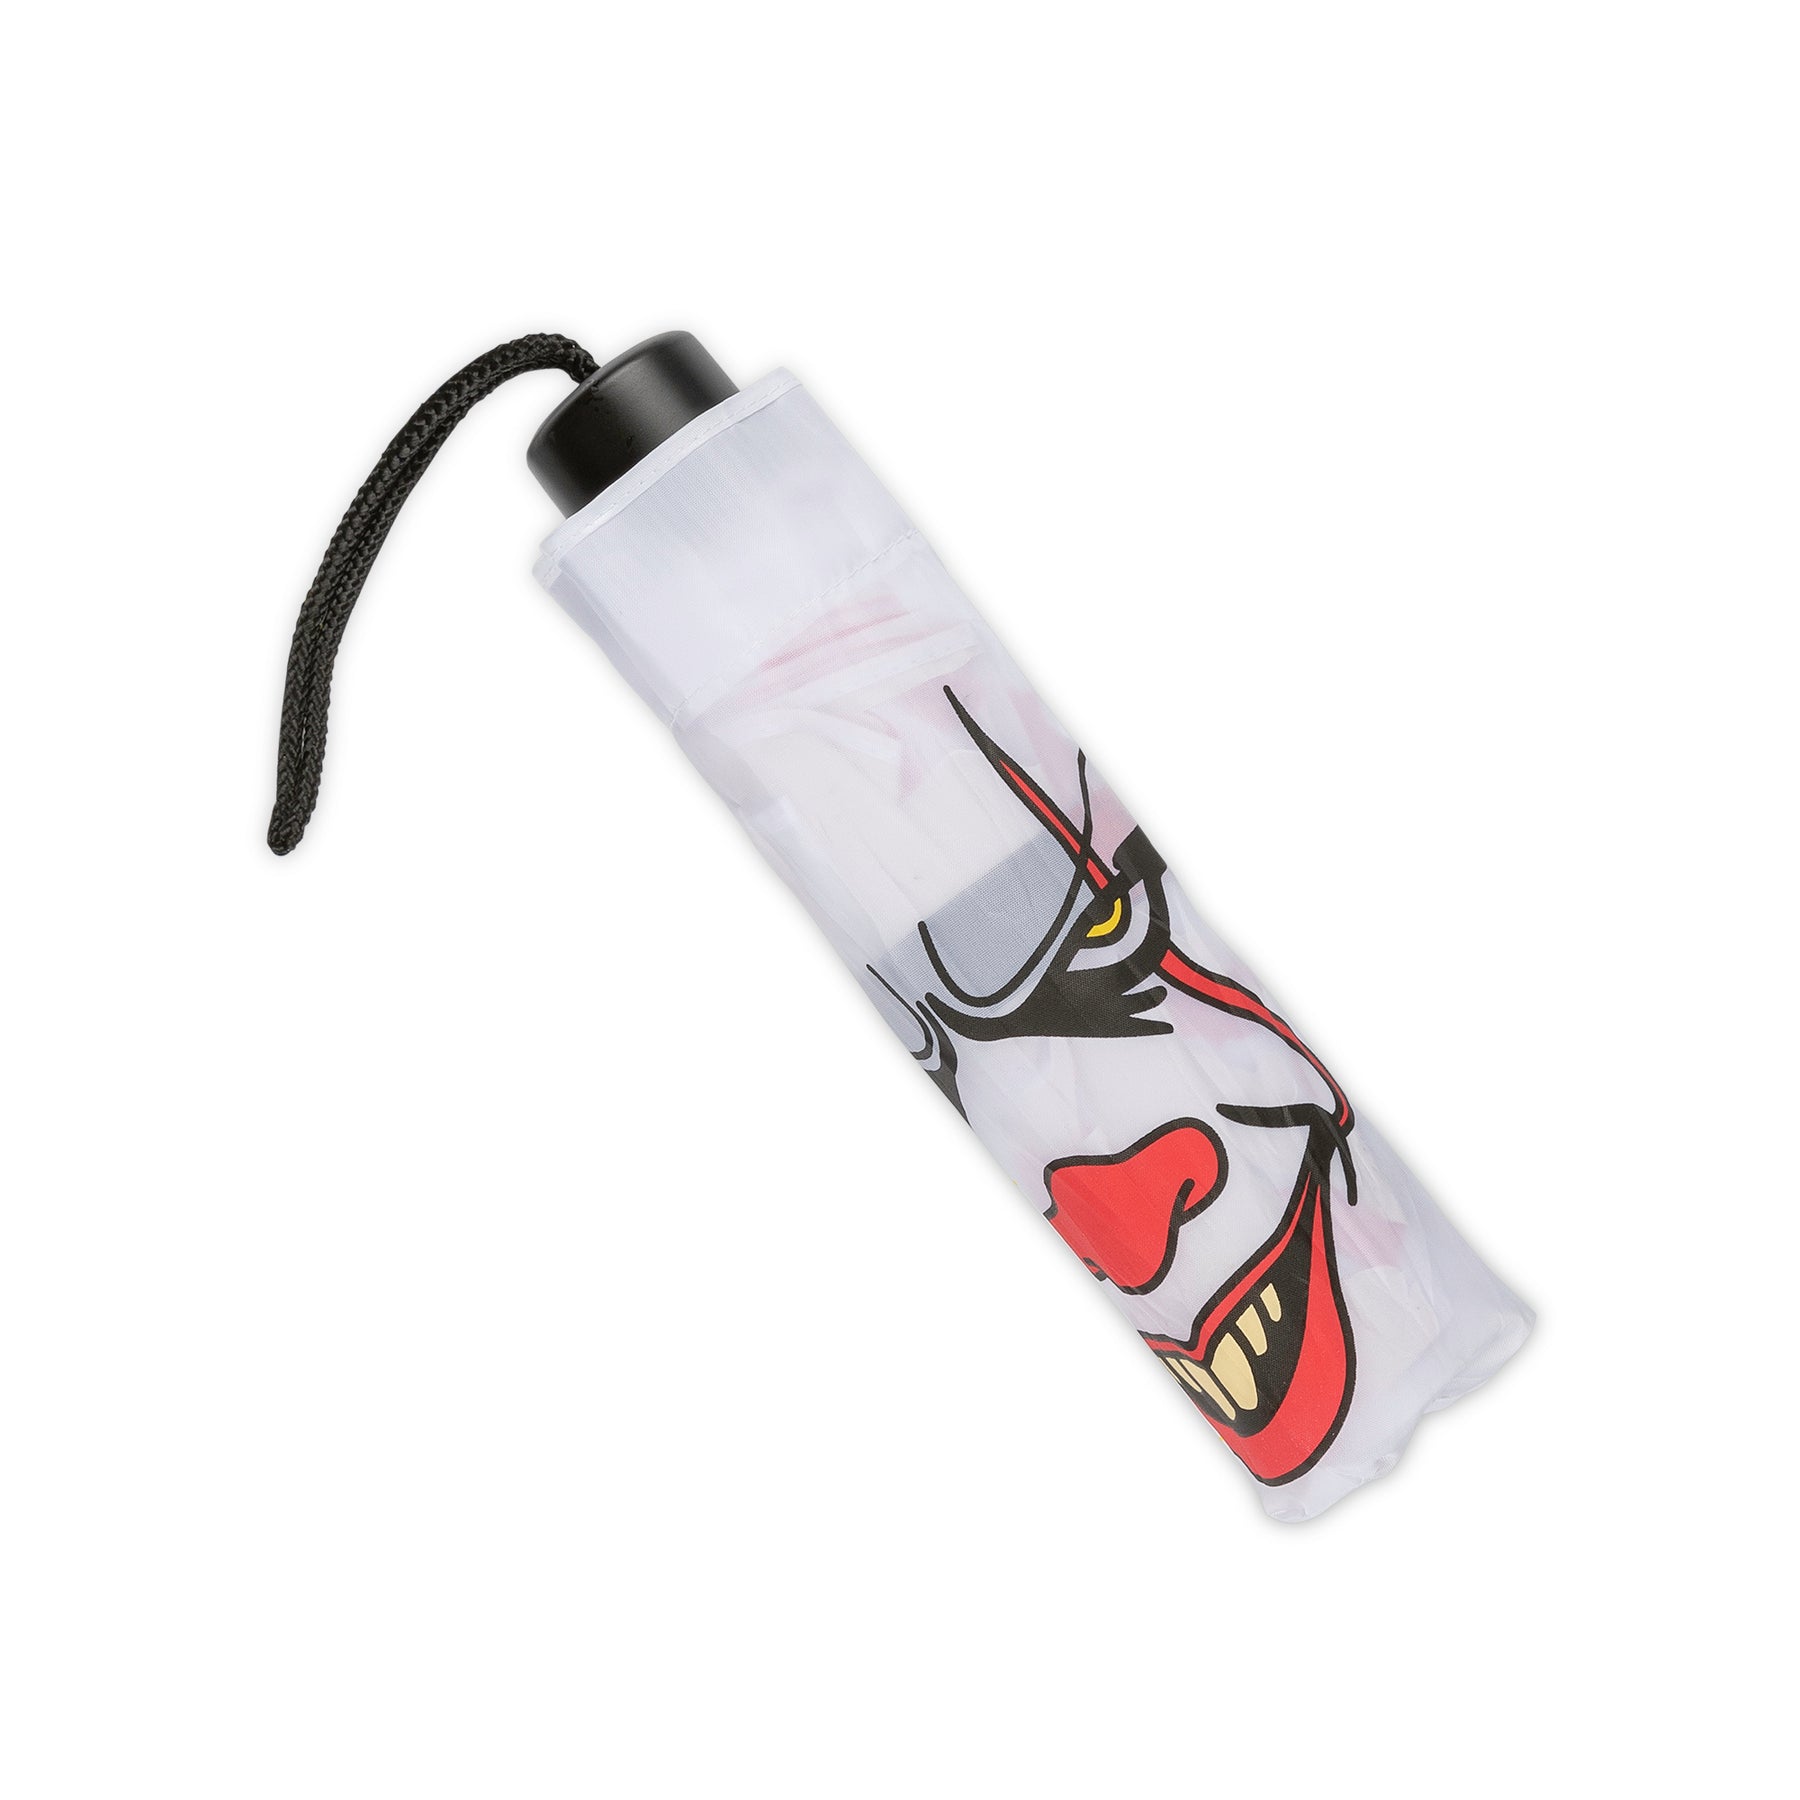 IT Liquid Colour Changing Pennywise Reactive Umbrella